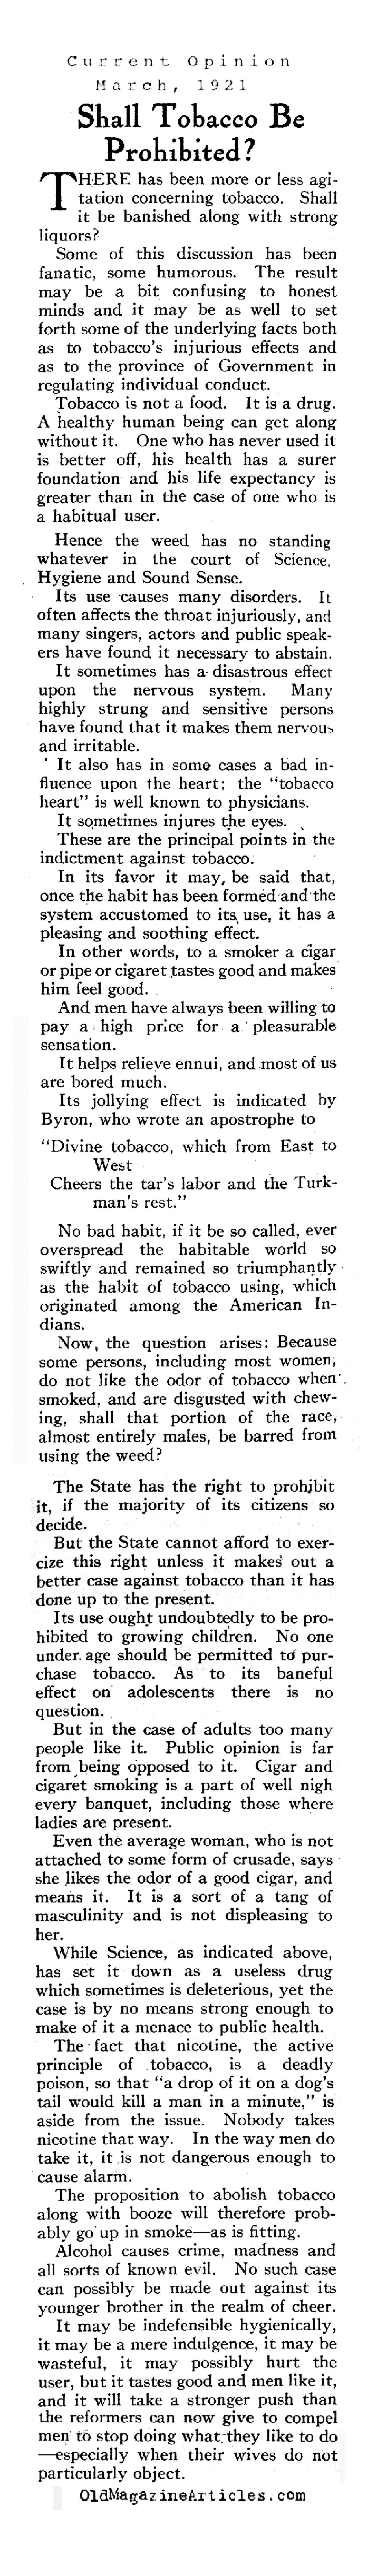 Shall Tobacco Be Prohibited, Too? (Current Opinion, 1921)